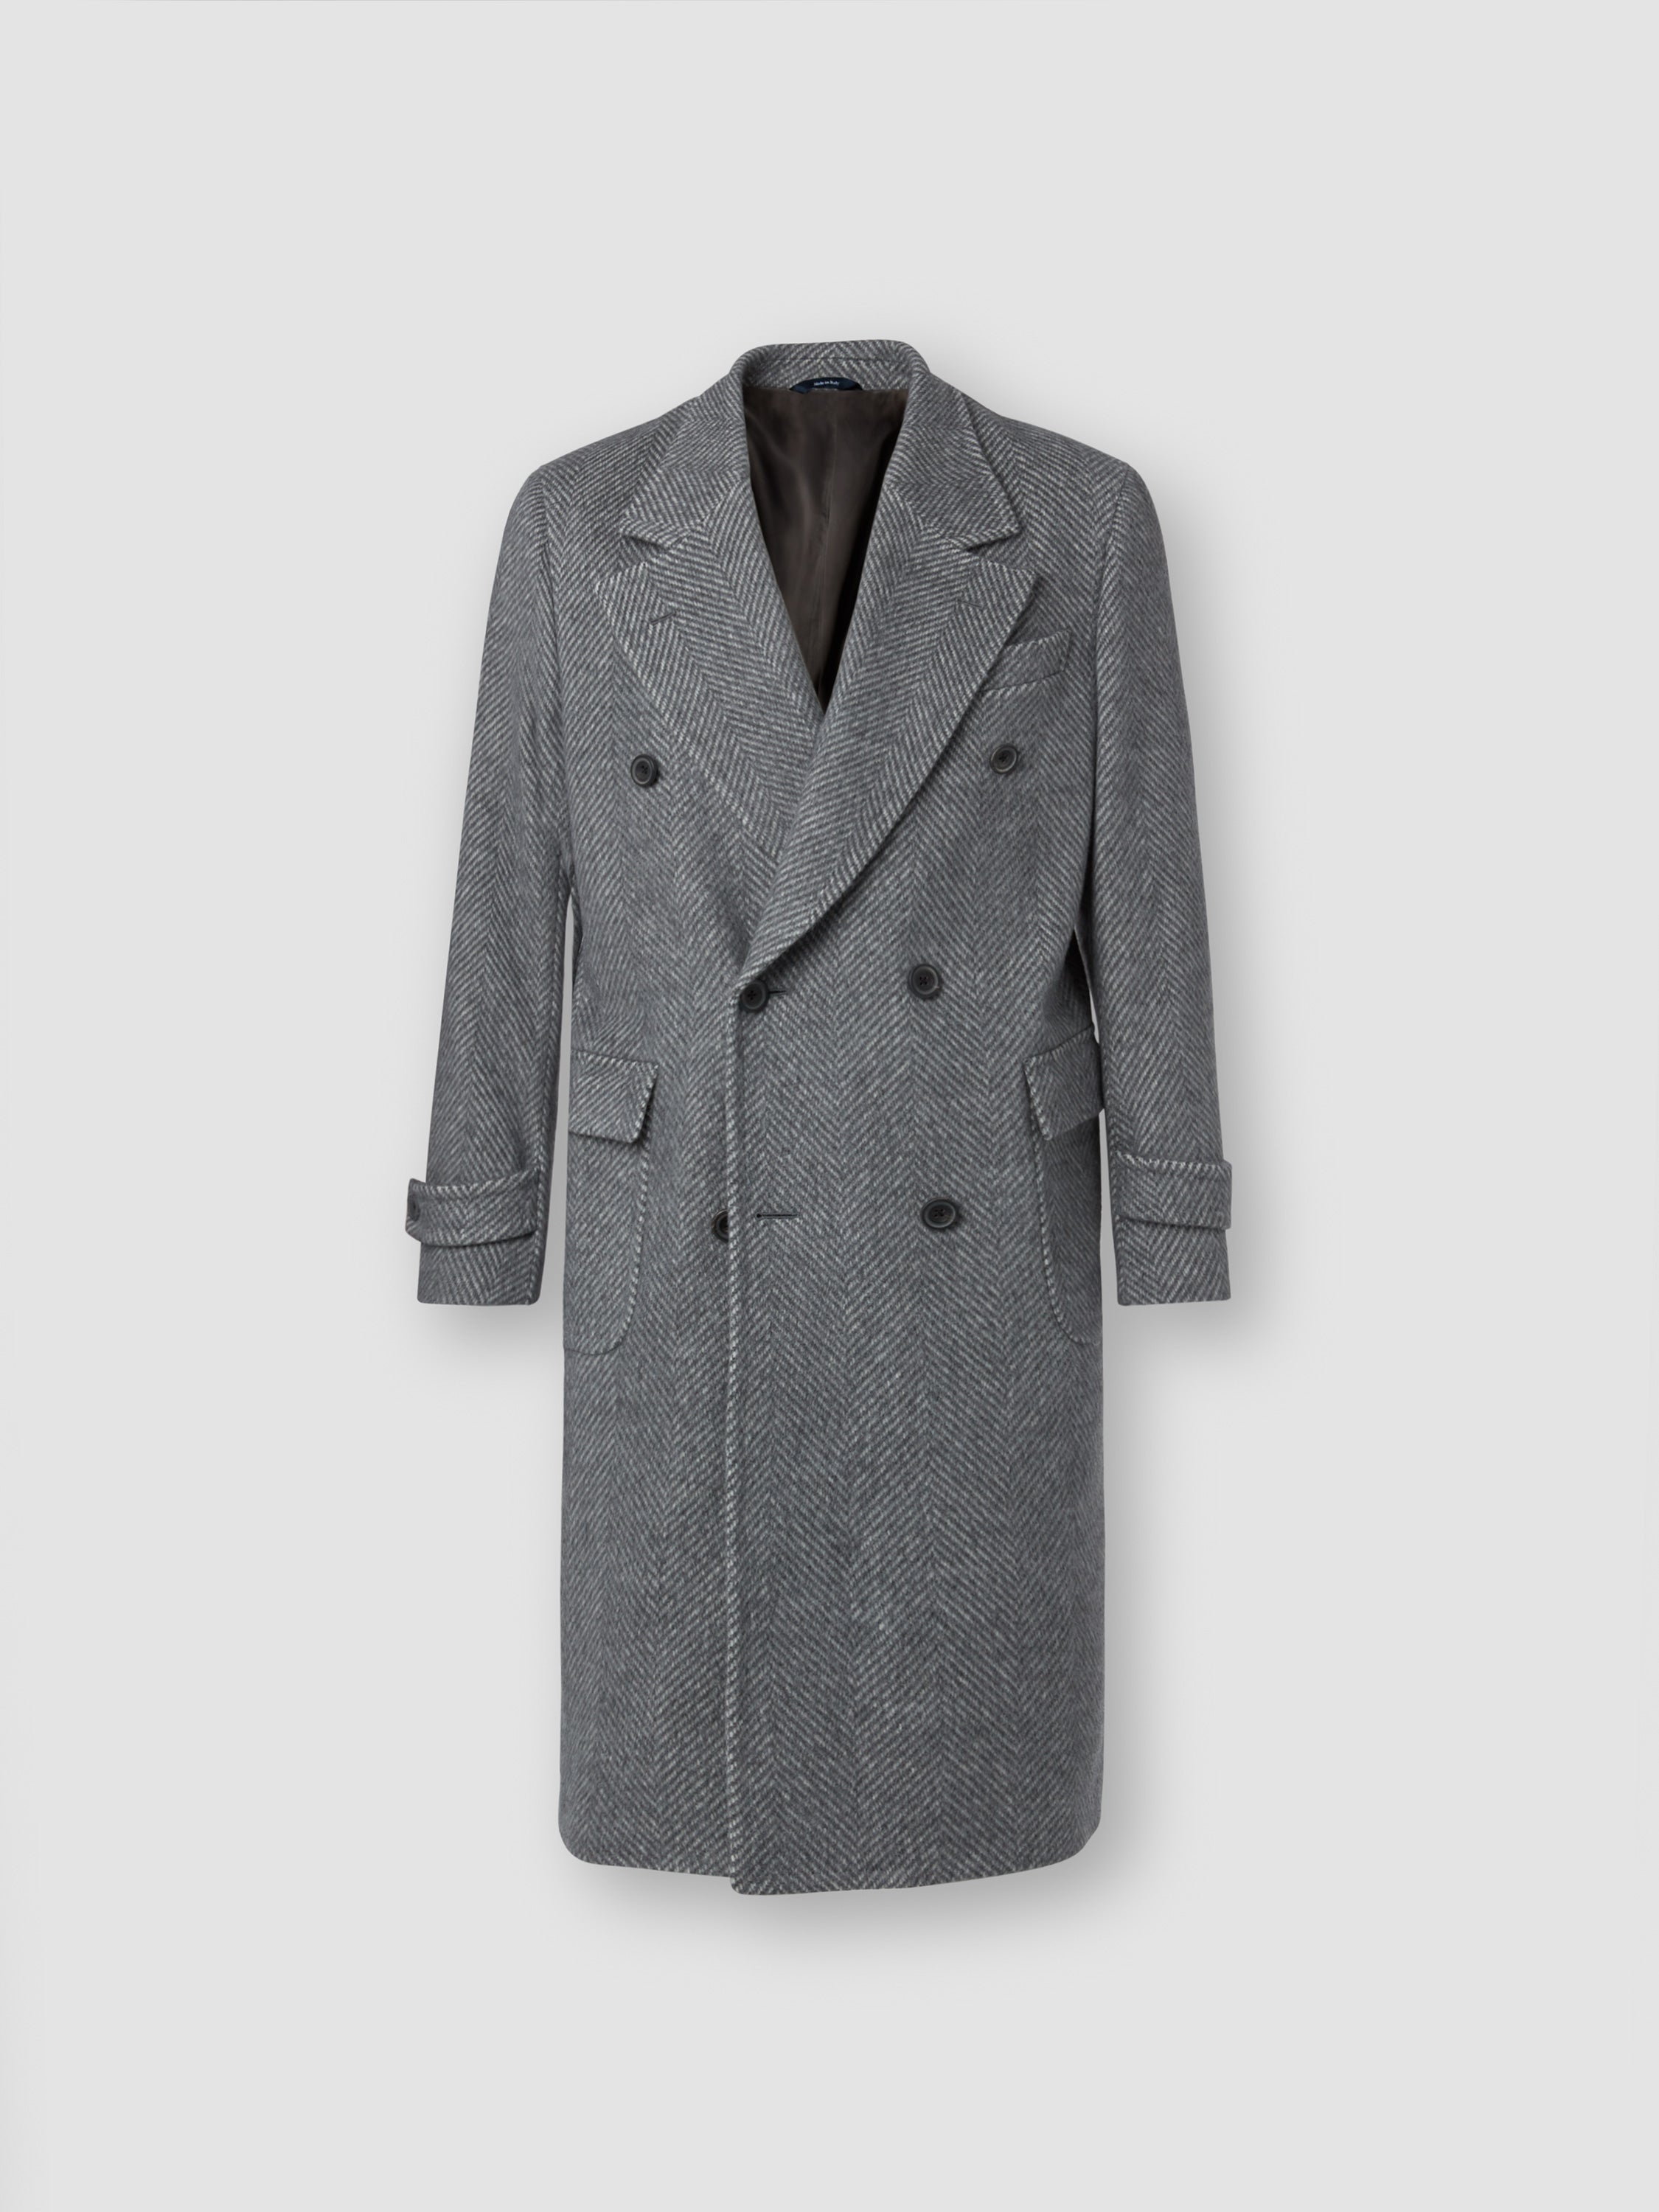 Unstructured Double Breasted Wool Overcoat Grey Product Image